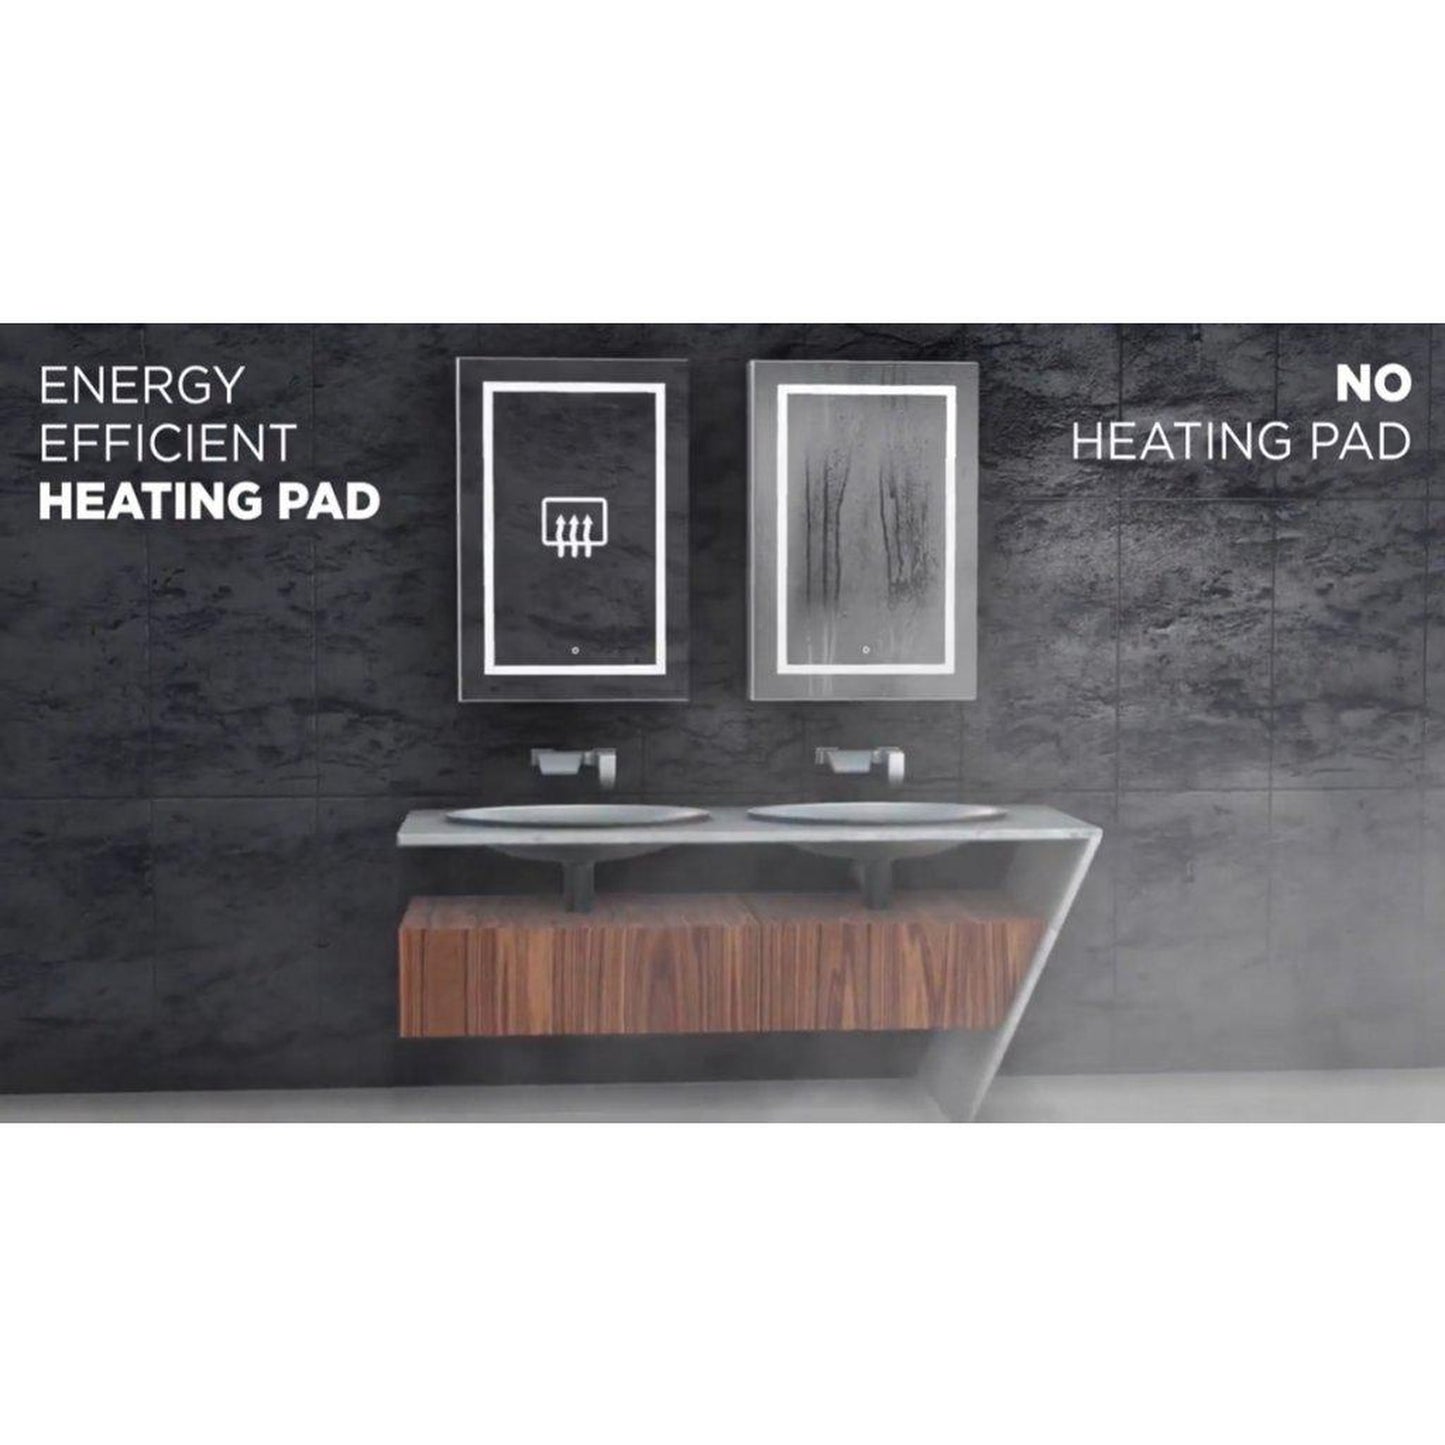 Krugg Reflections Mod 42" x 36" 21D 5000K Rectangular Modular Corner Wall-Mounted Silver-Backed LED Bathroom Vanity Mirror With Built-in Defogger and Dimmer